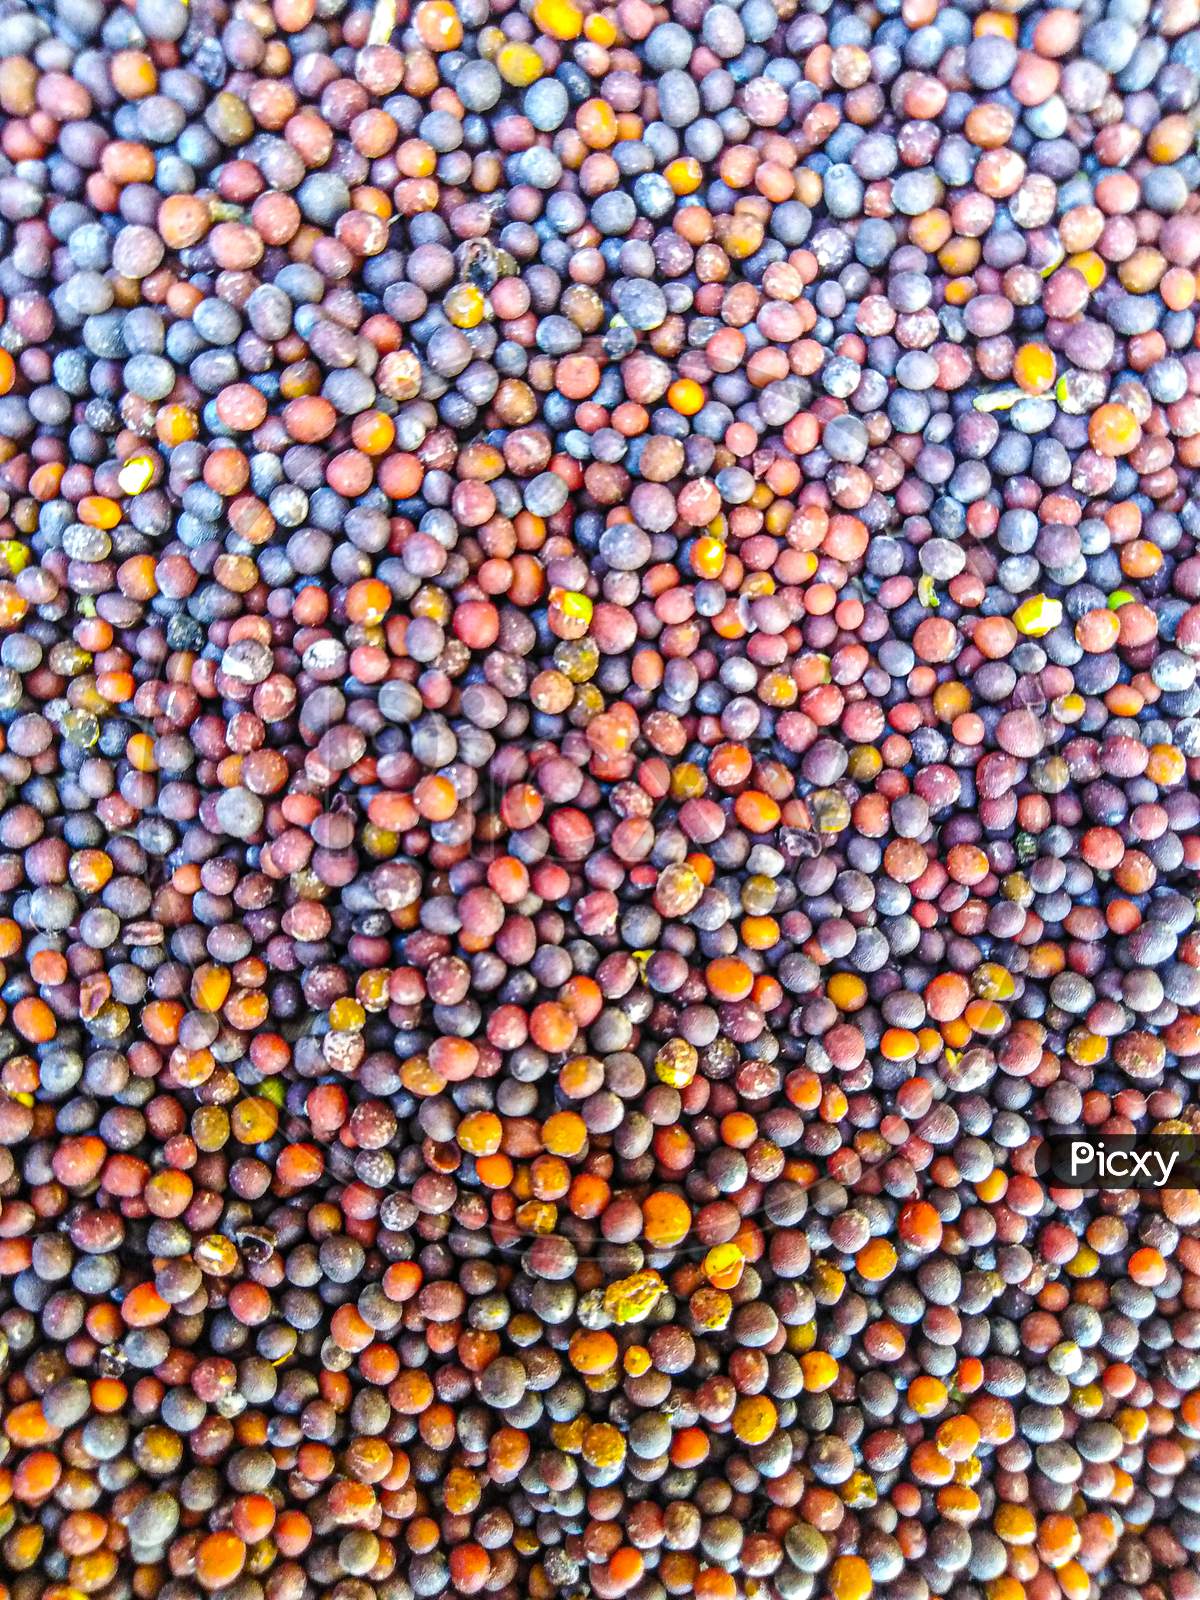 Mustard seeds are the small round seeds of various mustard plants.